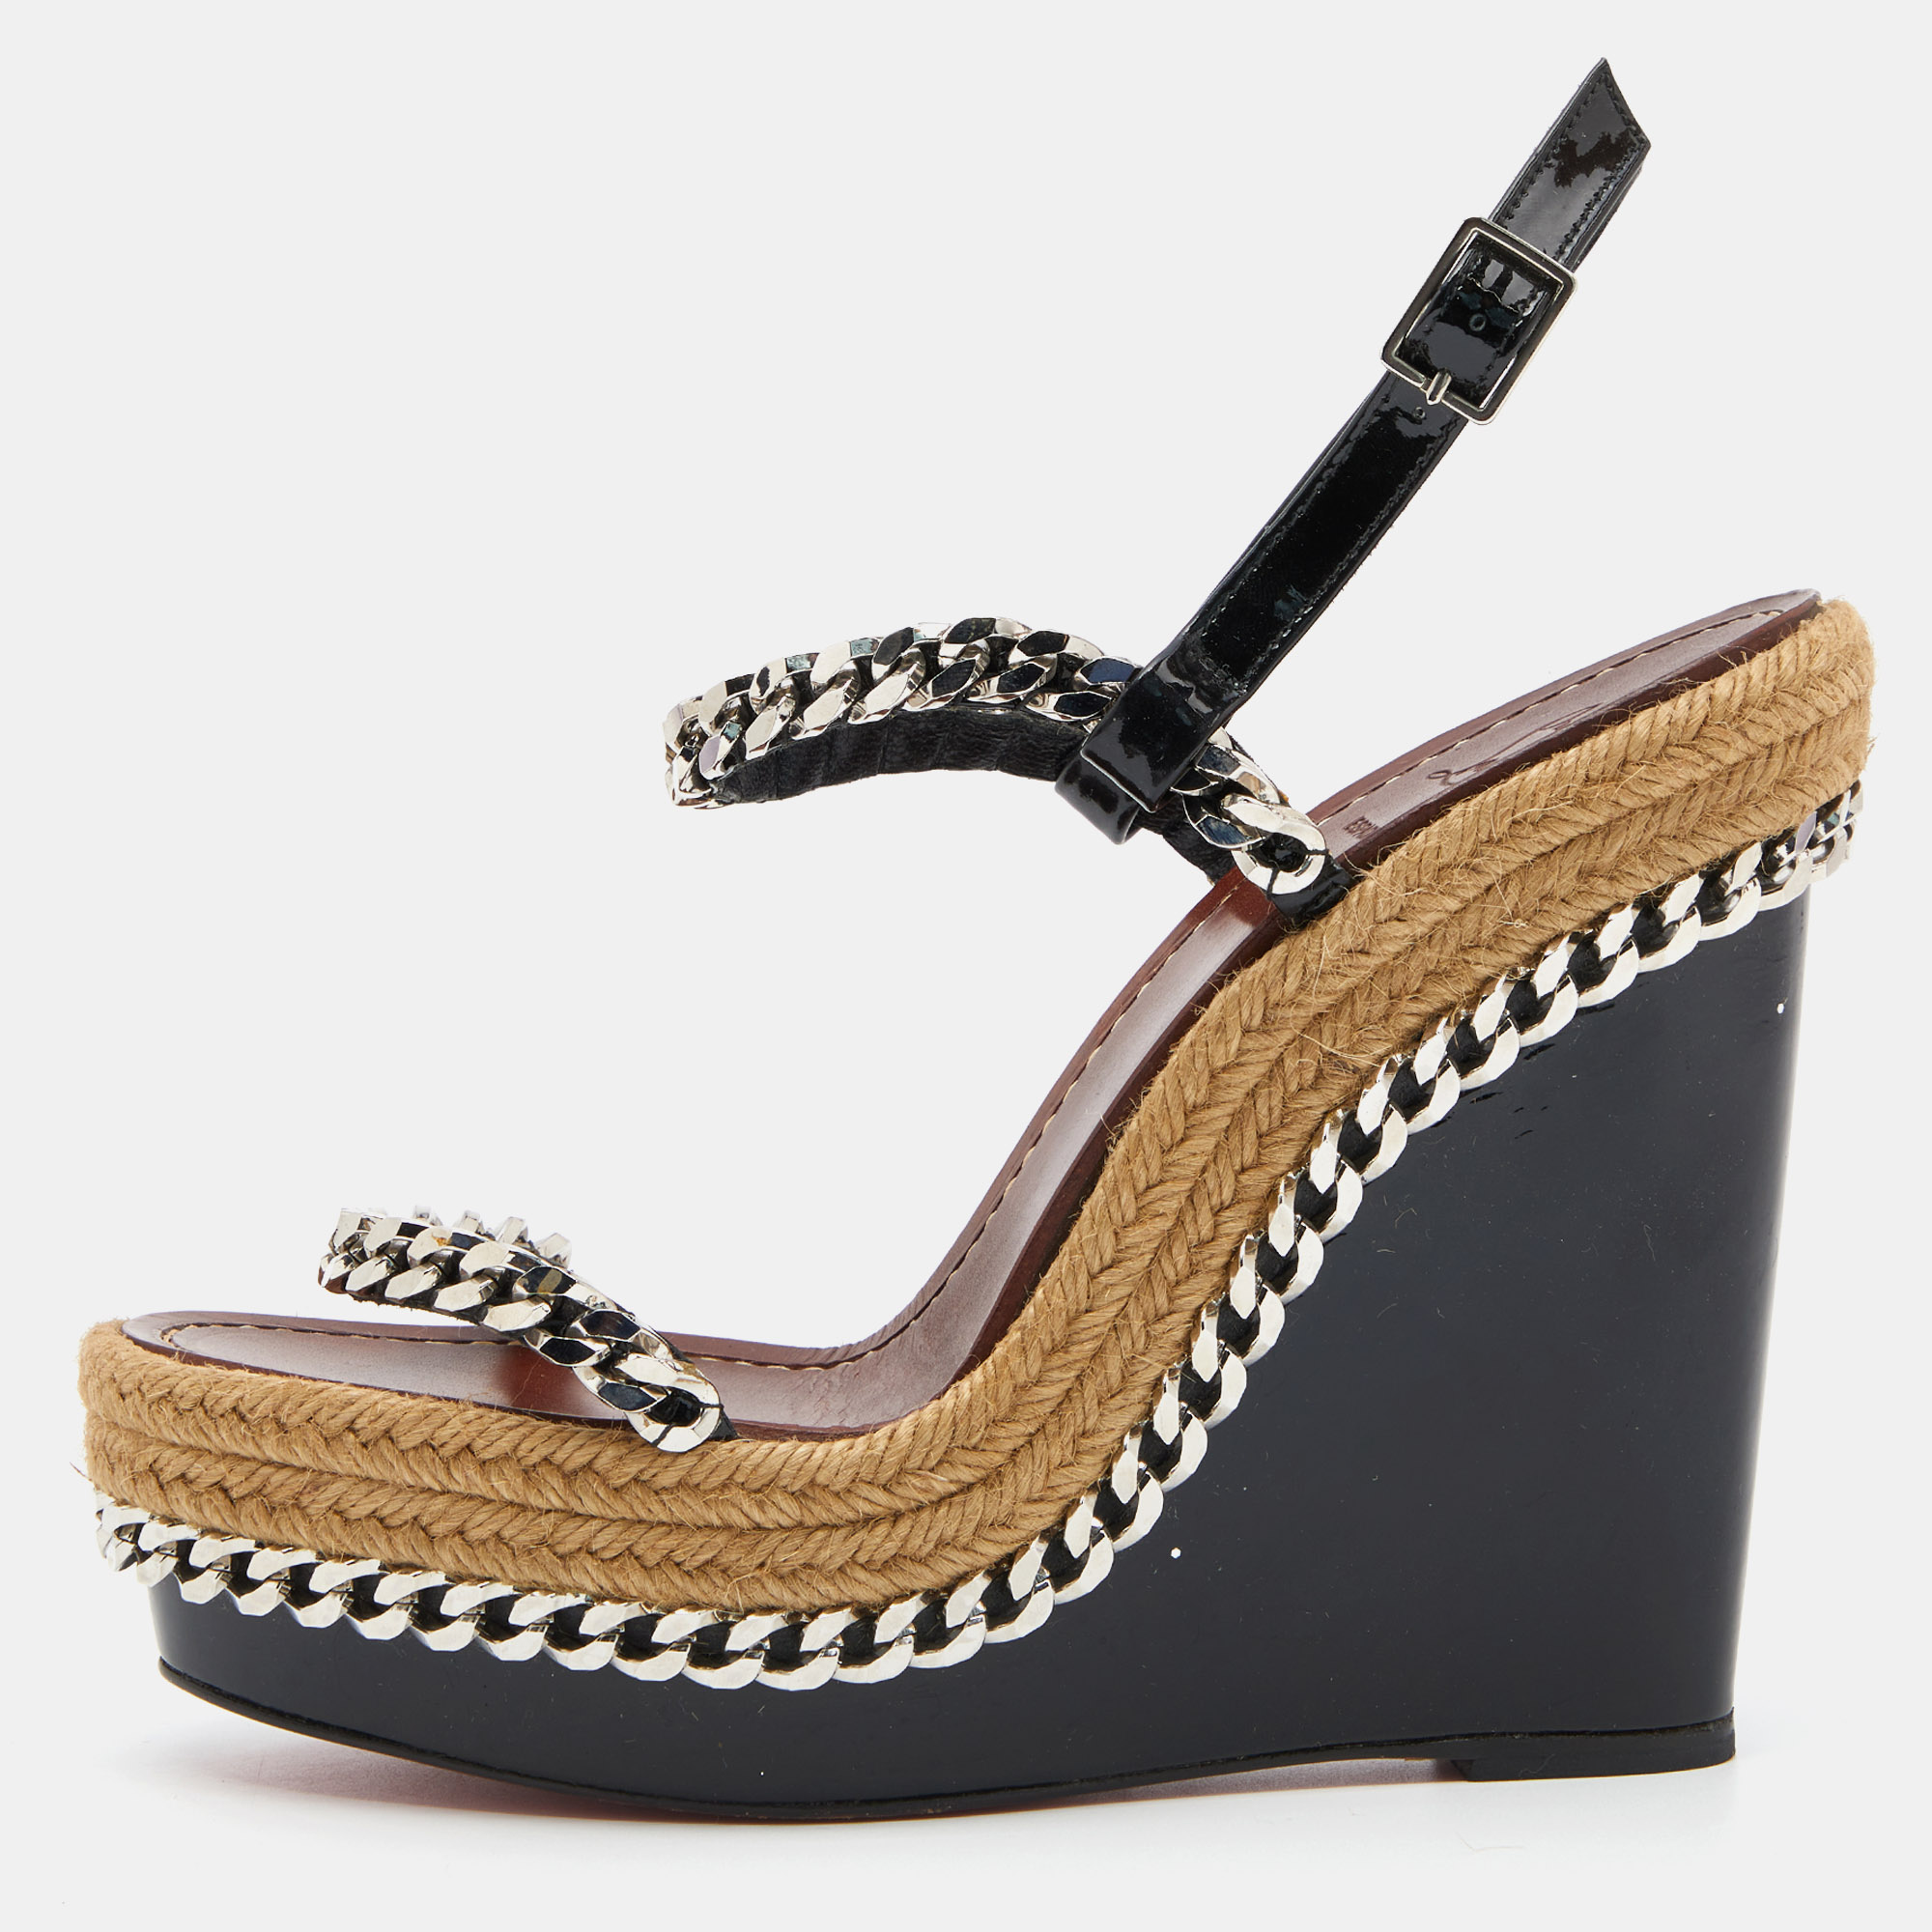 Pre-owned Christian Louboutin Black Patent Leather Pyraclou Espadrille Wedge Sandals Size 39